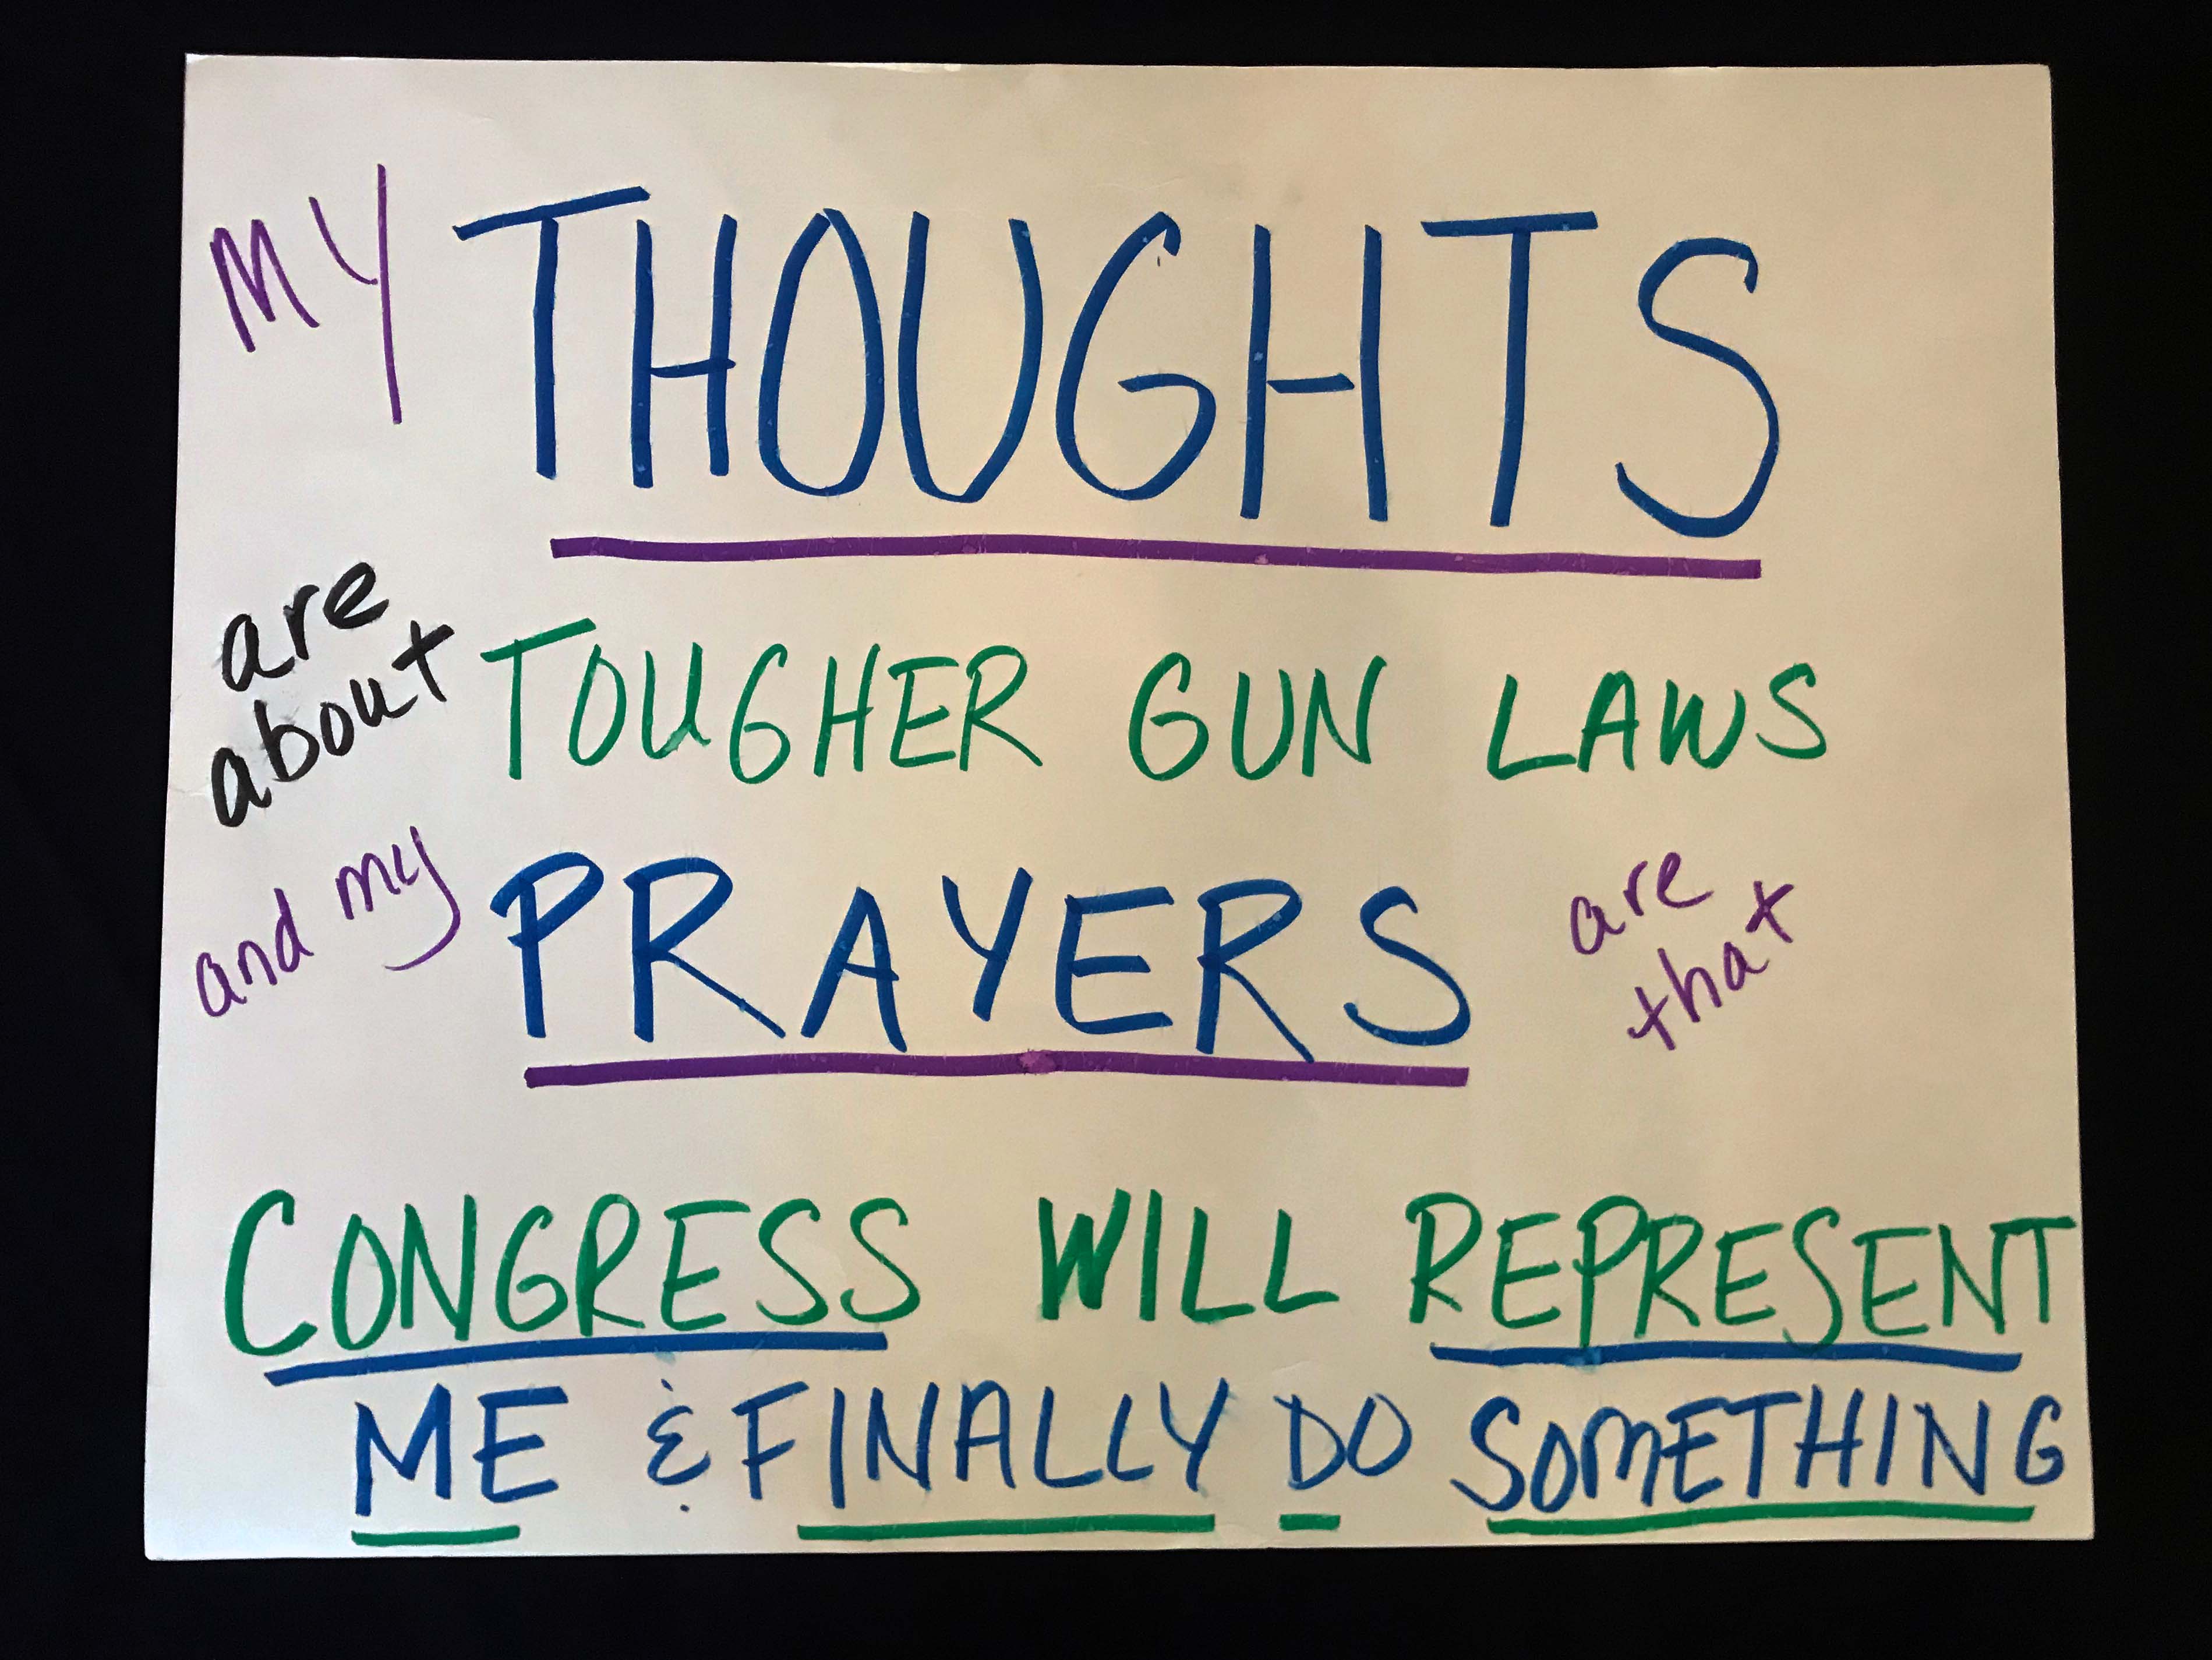 Charlotte March for Our Lives, 2018. Sign reads: "My thoughts are about tougher gun laws, and my prayers are that Congress will represent me and finally do something."